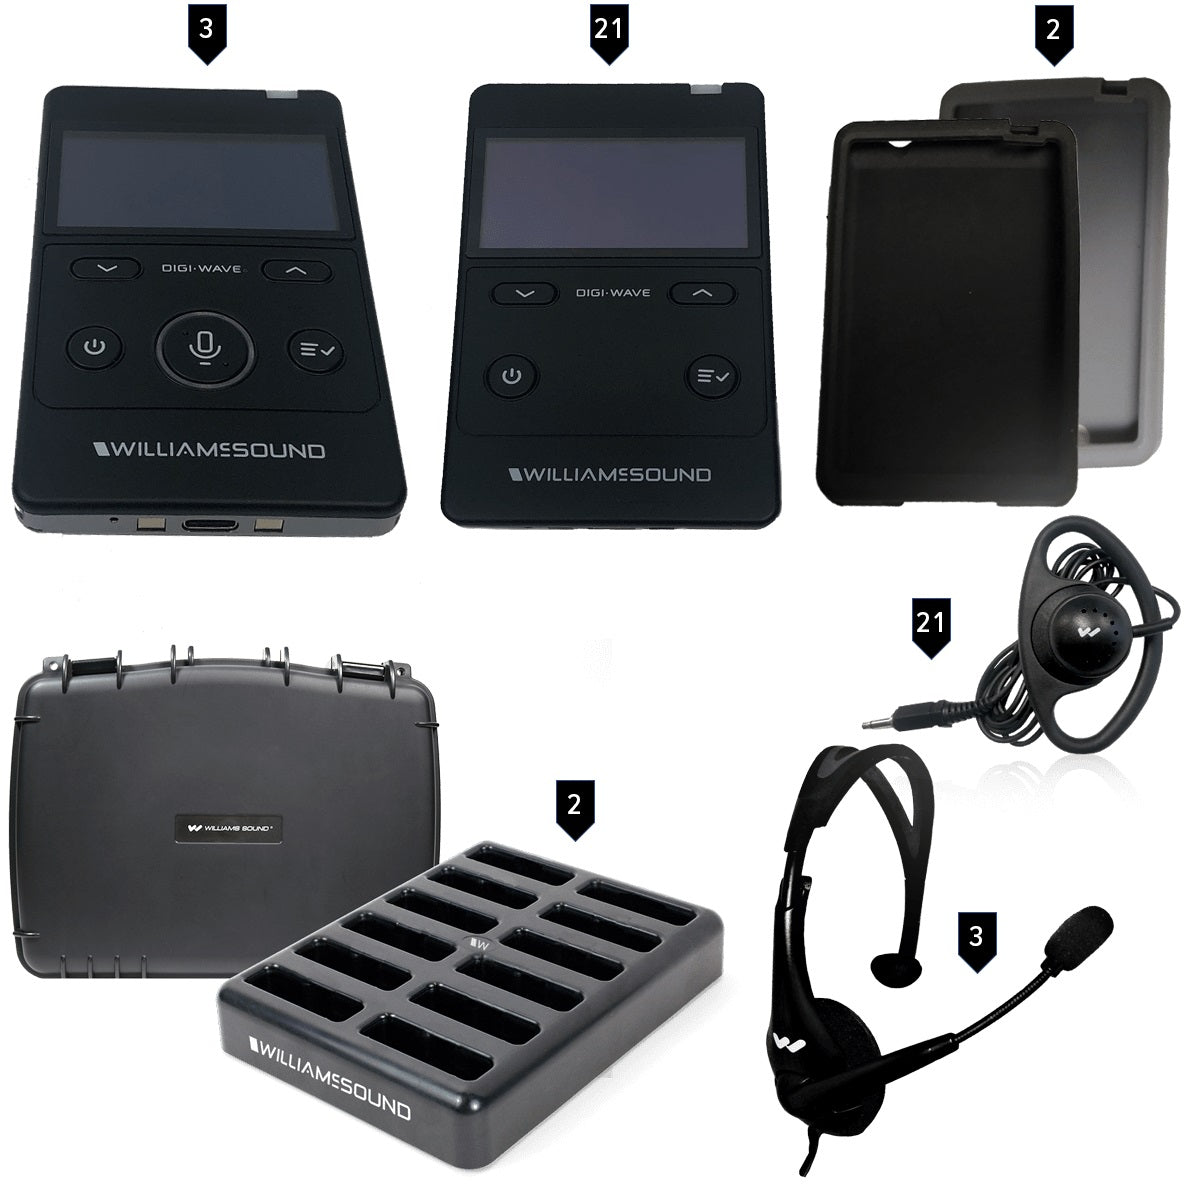 Digi-Wave 400 Series Rechargeable Interpretation System for up to three presenters and 21 listeners - DWS INT 4 400